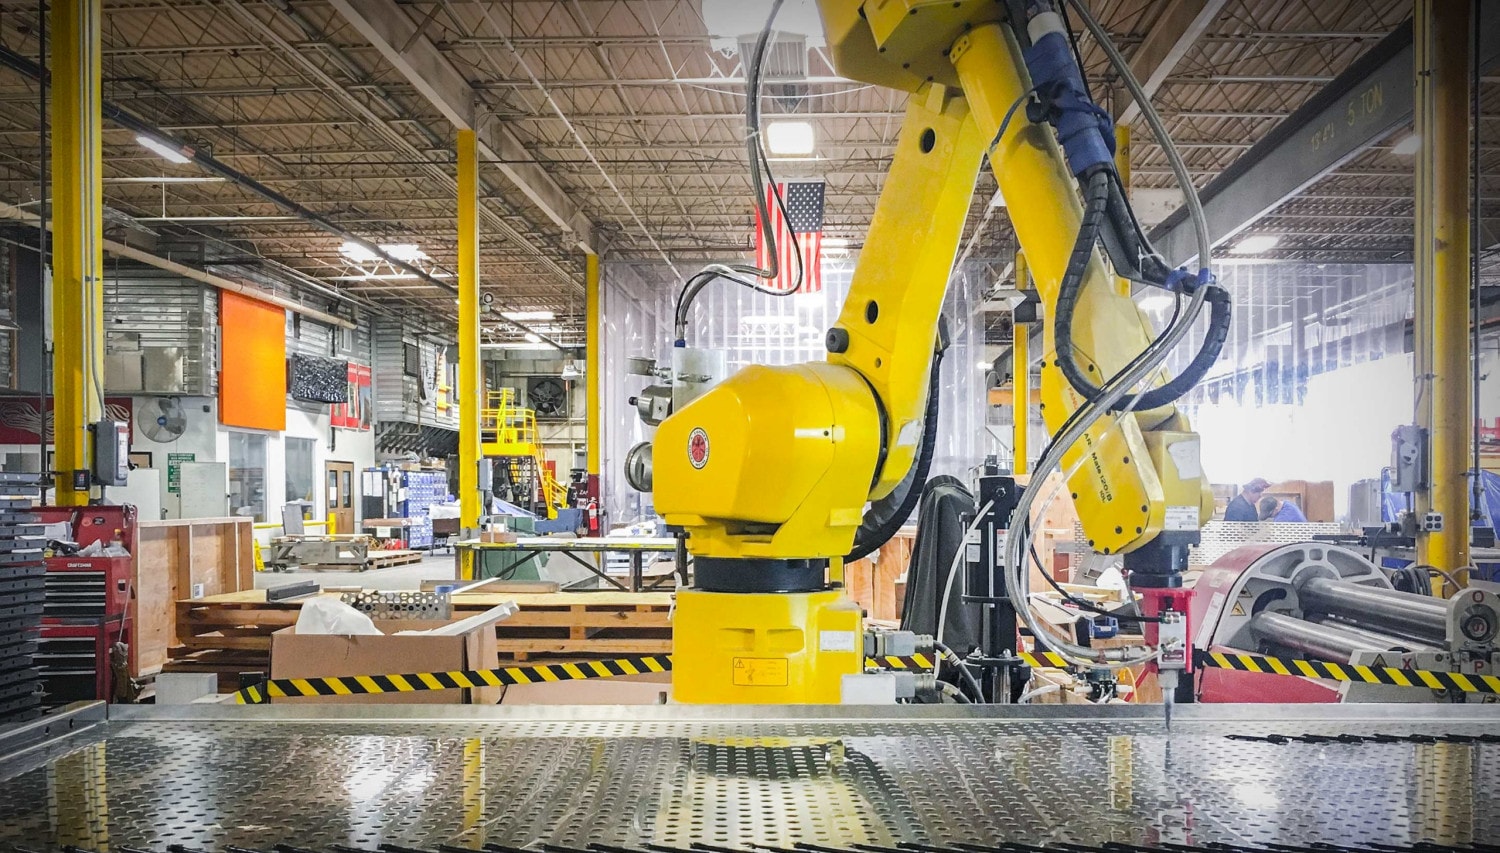 Zahner shop robotic arm places adhesive on perforated metal panels.